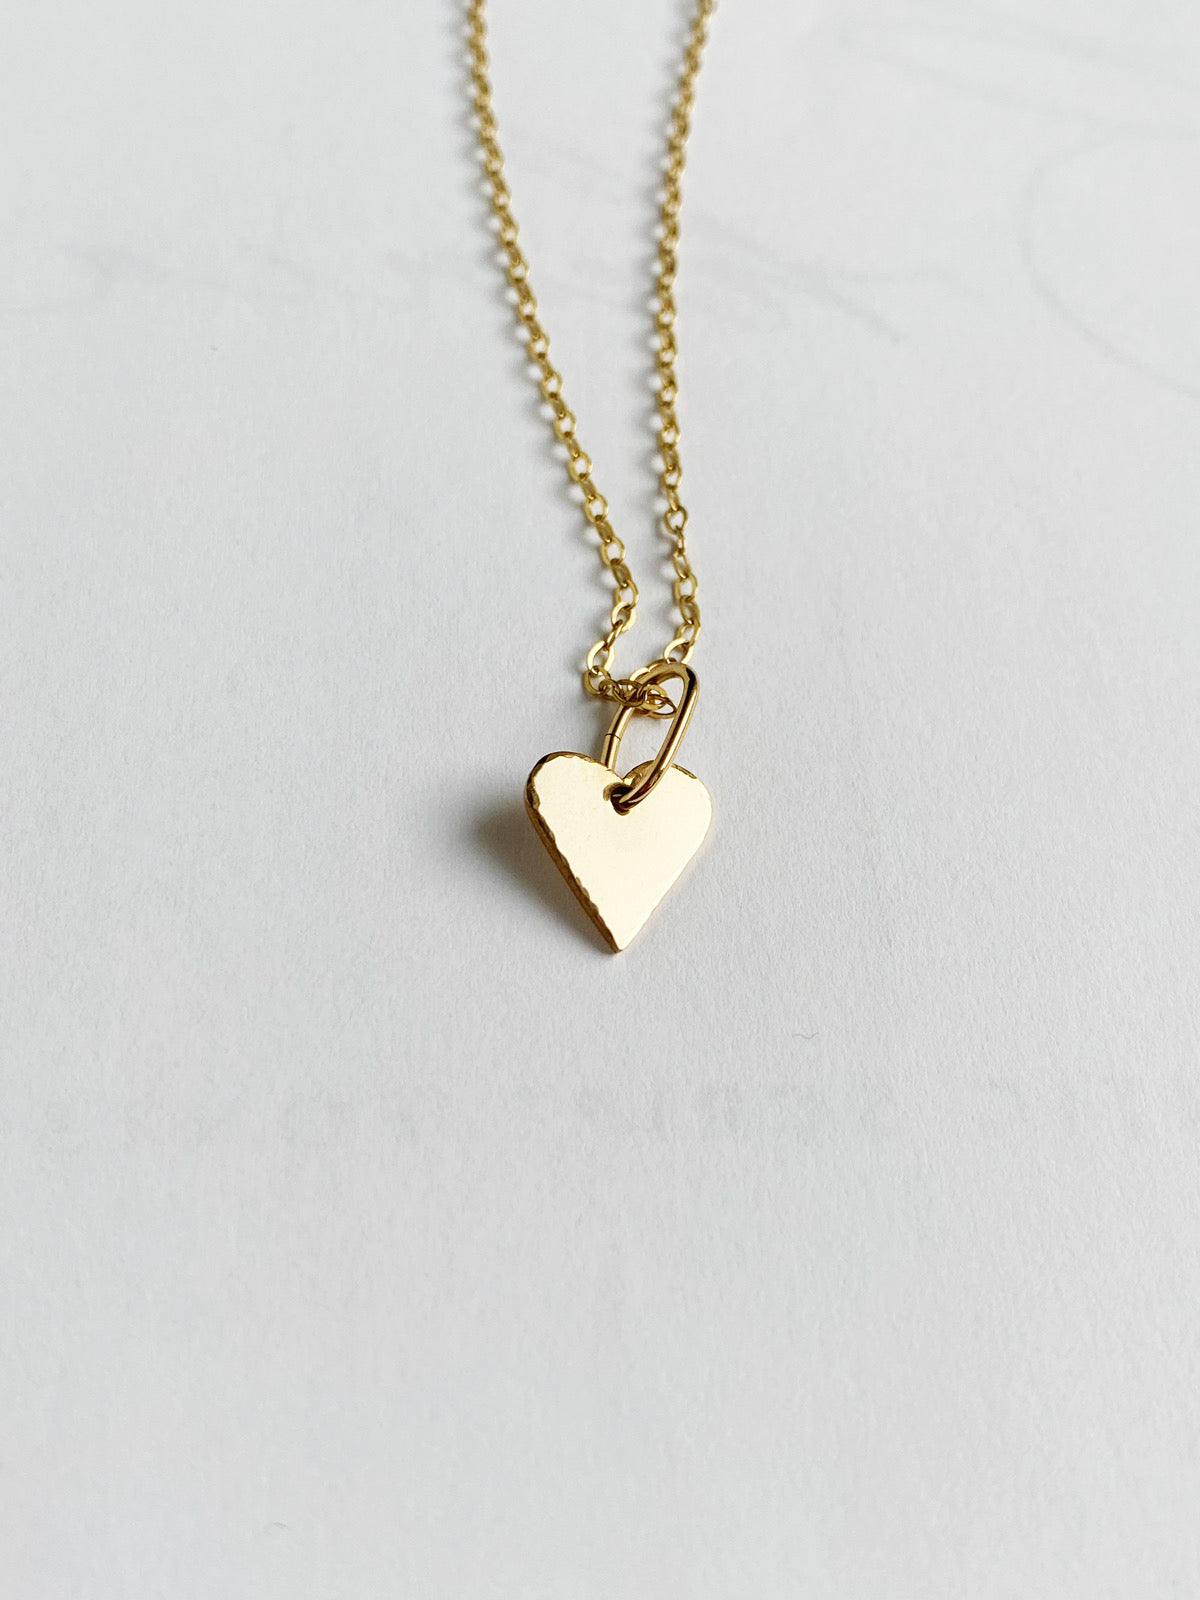 gold heart necklace dainty 14k gold heart necklace